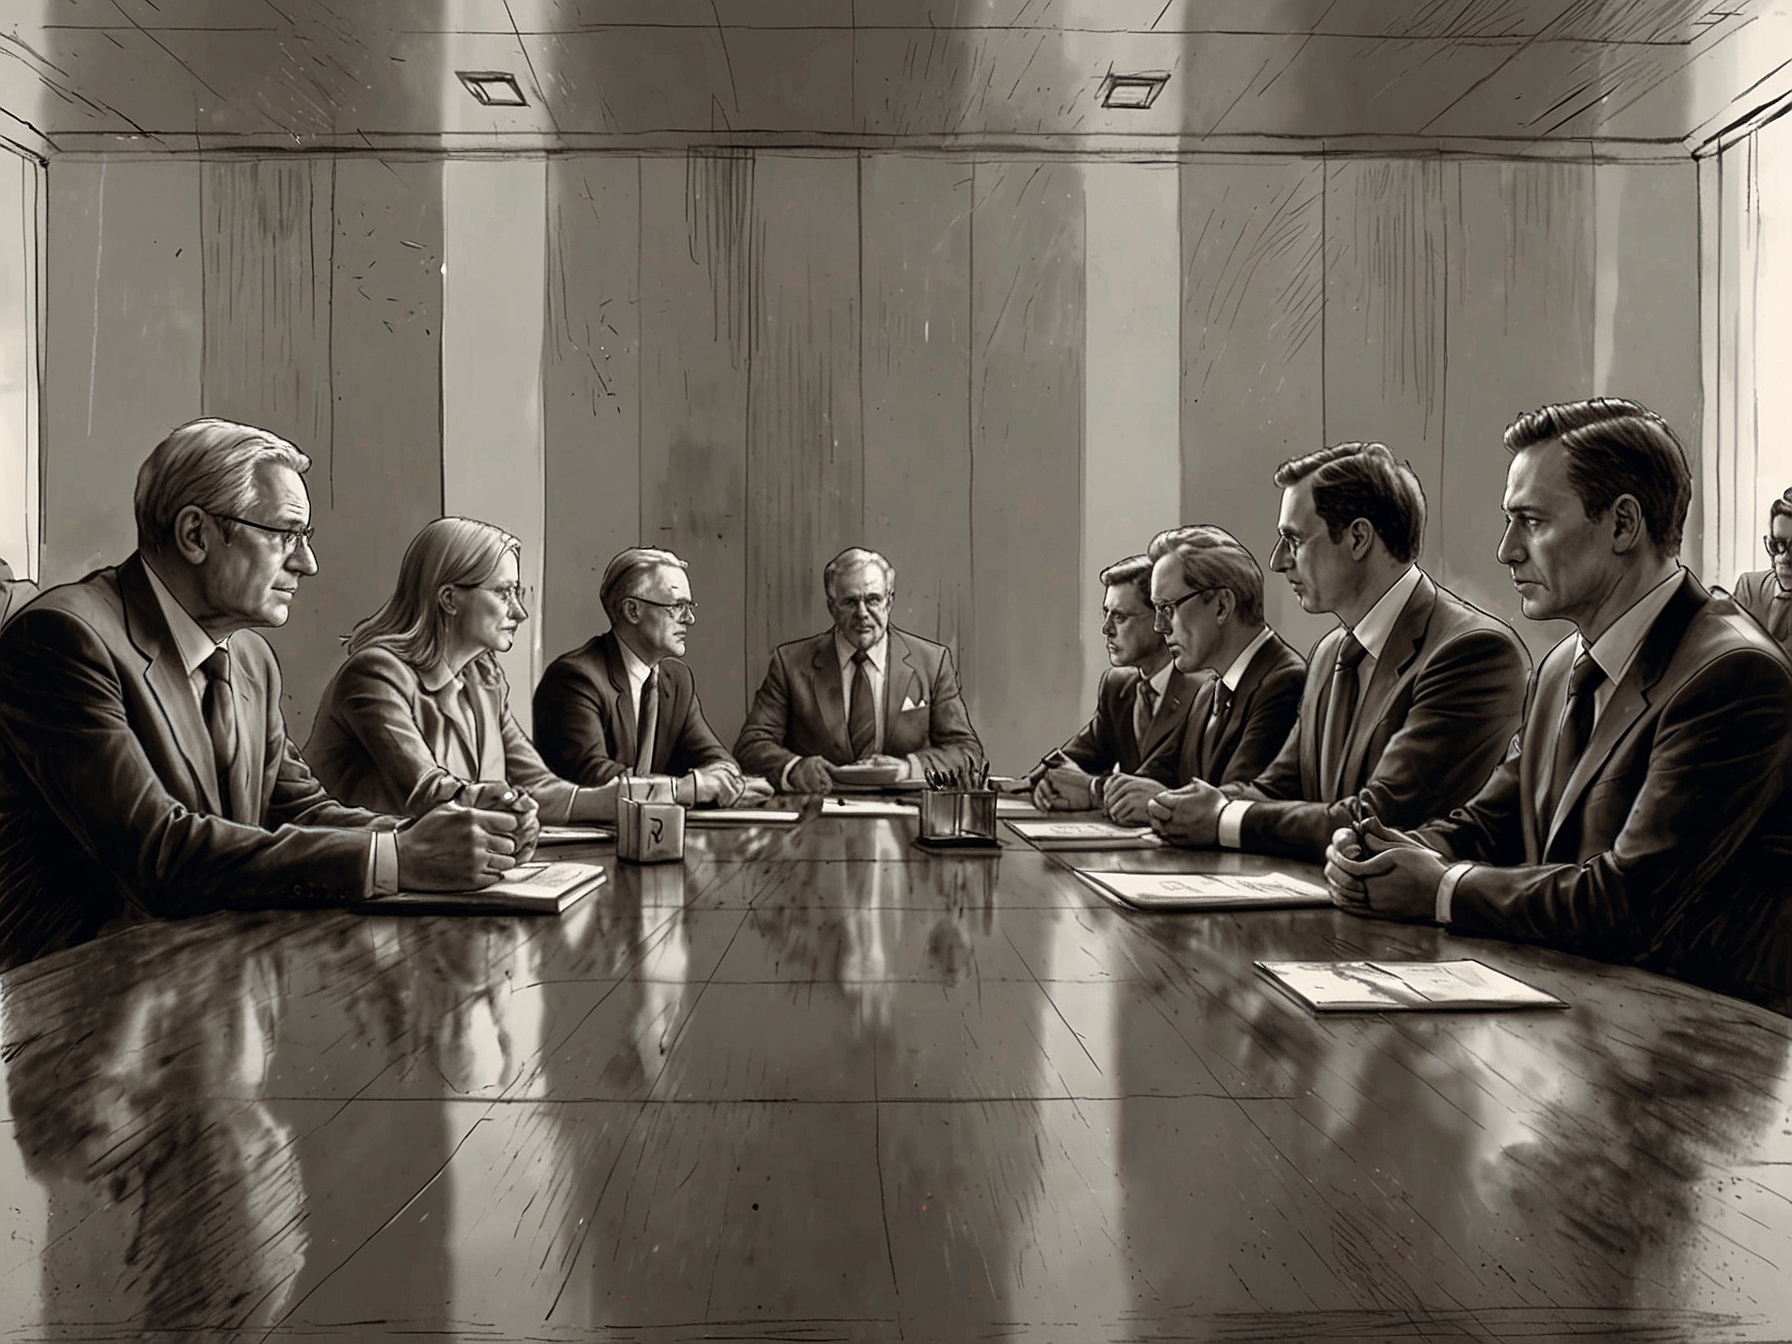 A group of elite leaders in a boardroom making important decisions that impact society.